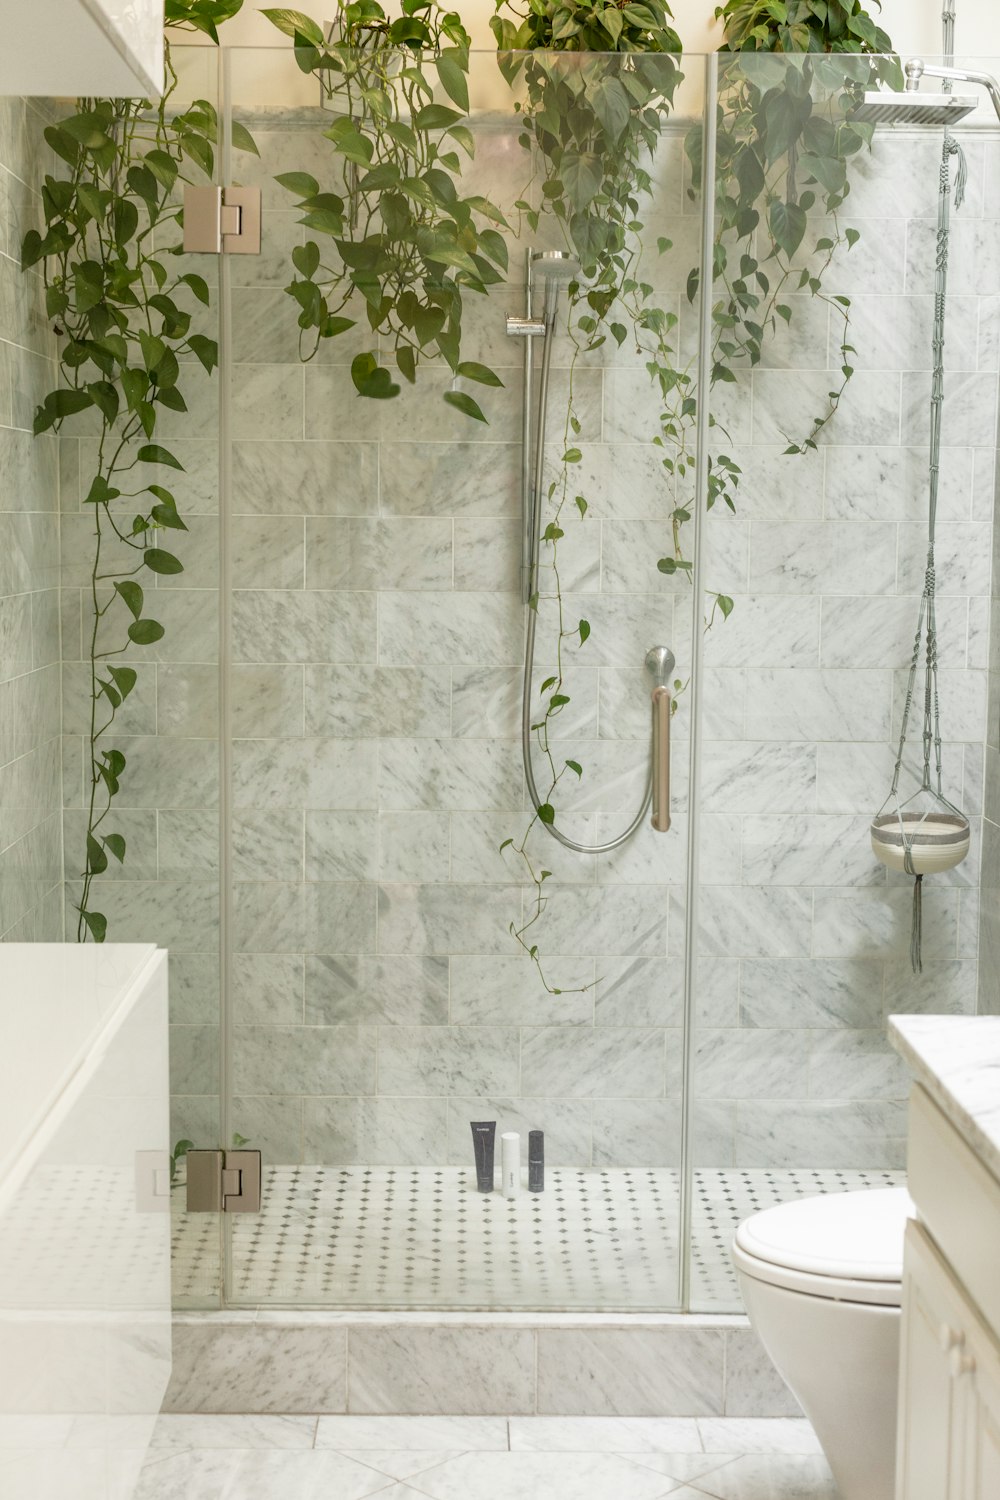 A shower room with plants.